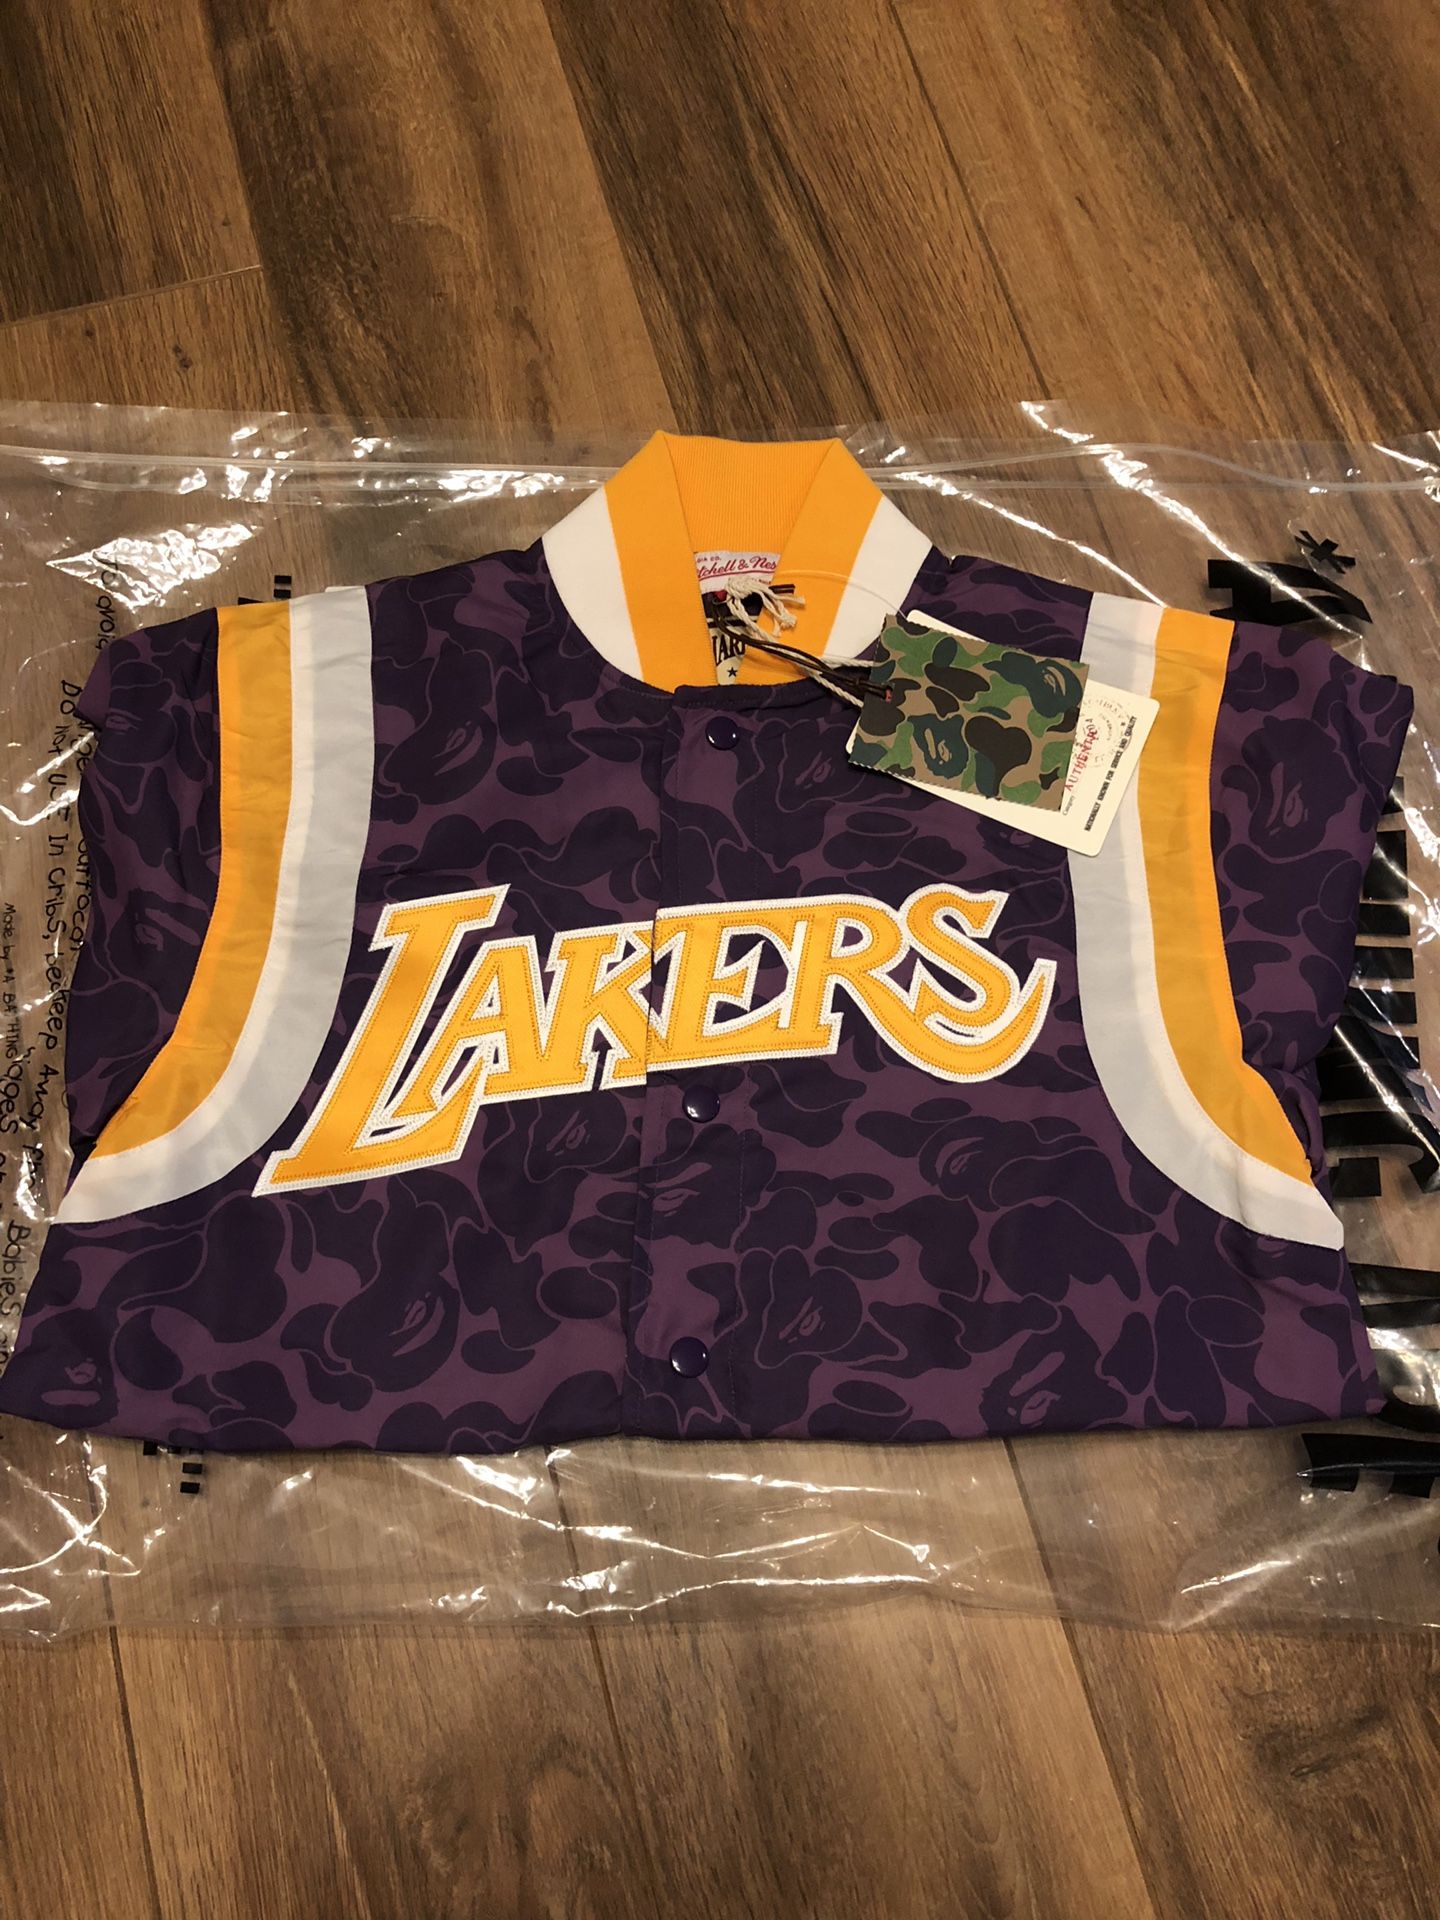 A BAPE LAKERS Sweatshirt Make A Offer! for Sale in Lawrenceville, GA -  OfferUp